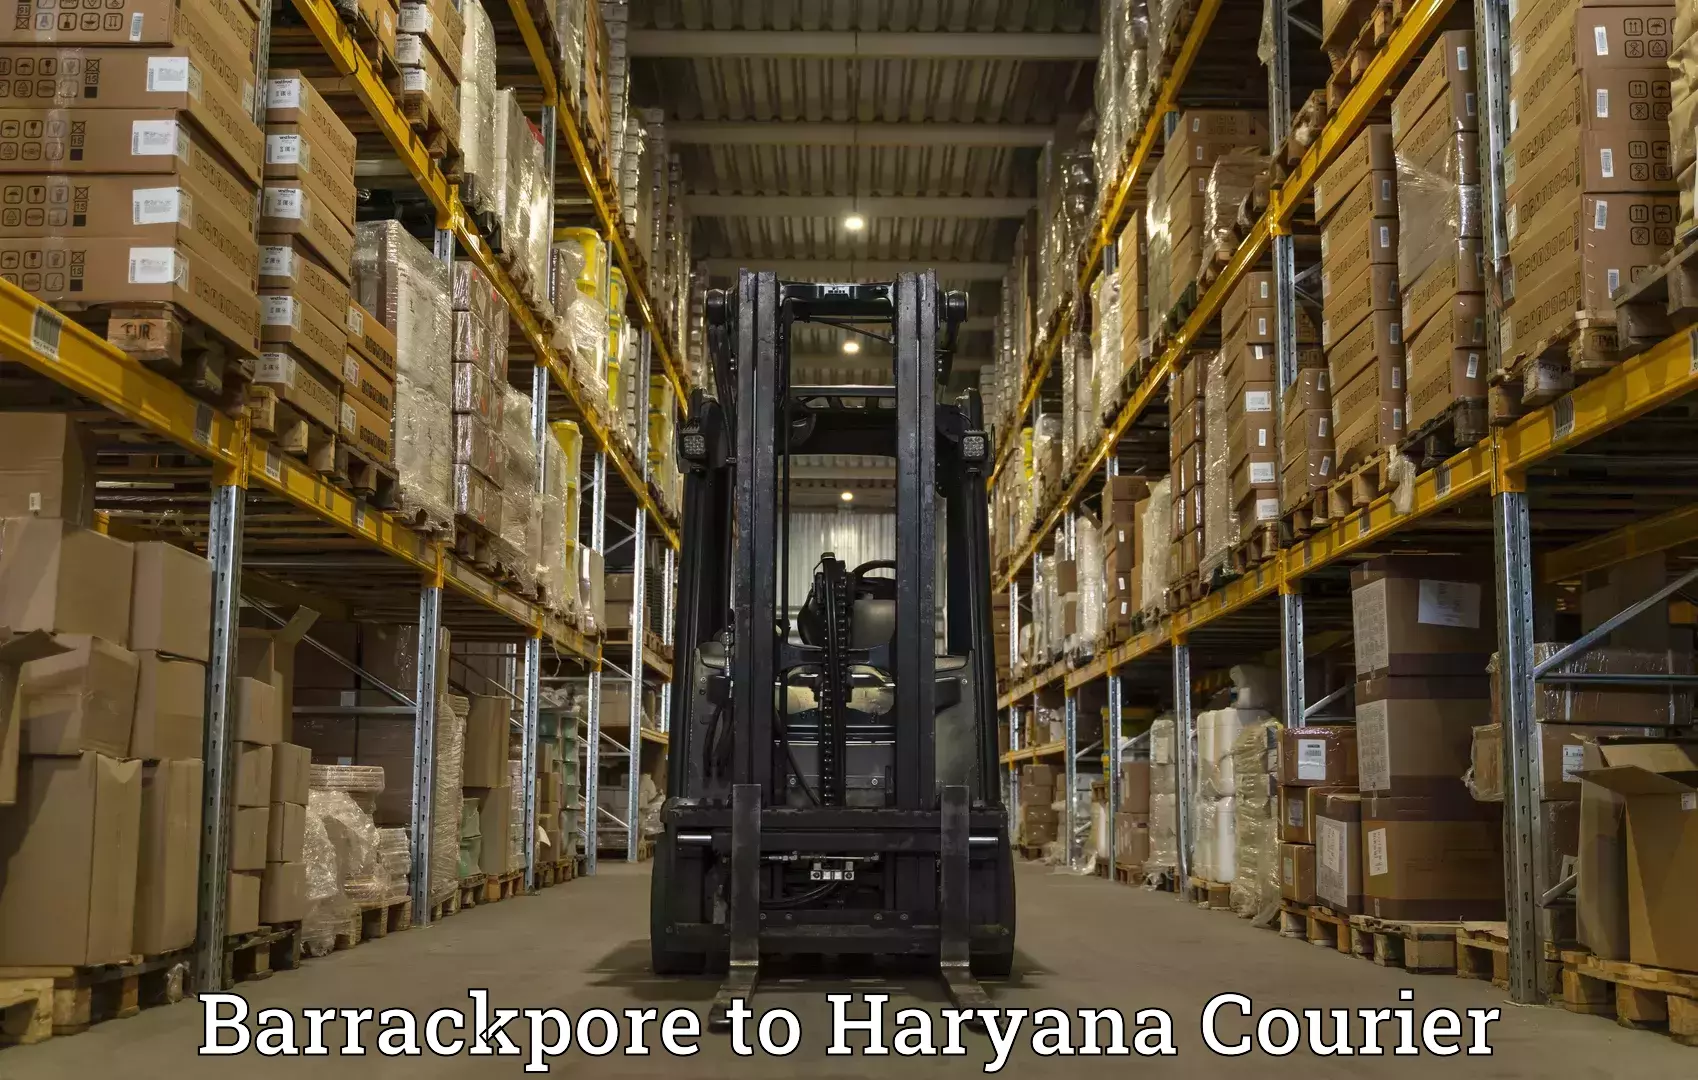 State-of-the-art courier technology Barrackpore to Bilaspur Haryana